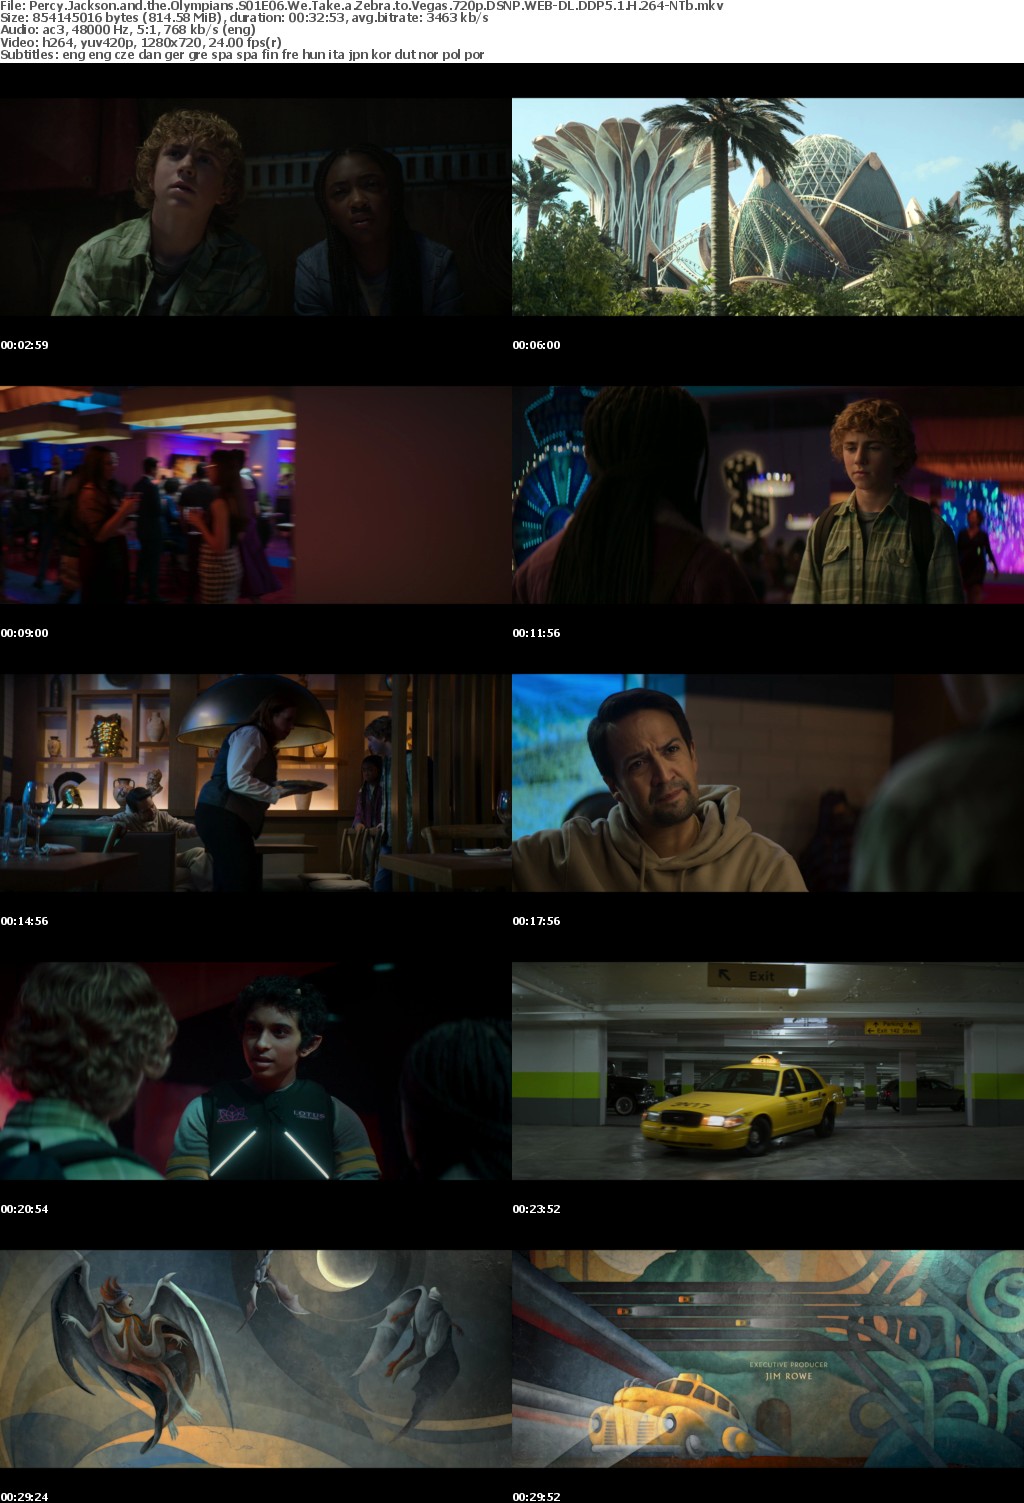 Percy Jackson and the Olympians S01E06 We Take a Zebra to Vegas 720p DSNP WEB-DL DDP5 1 H 264-NTb